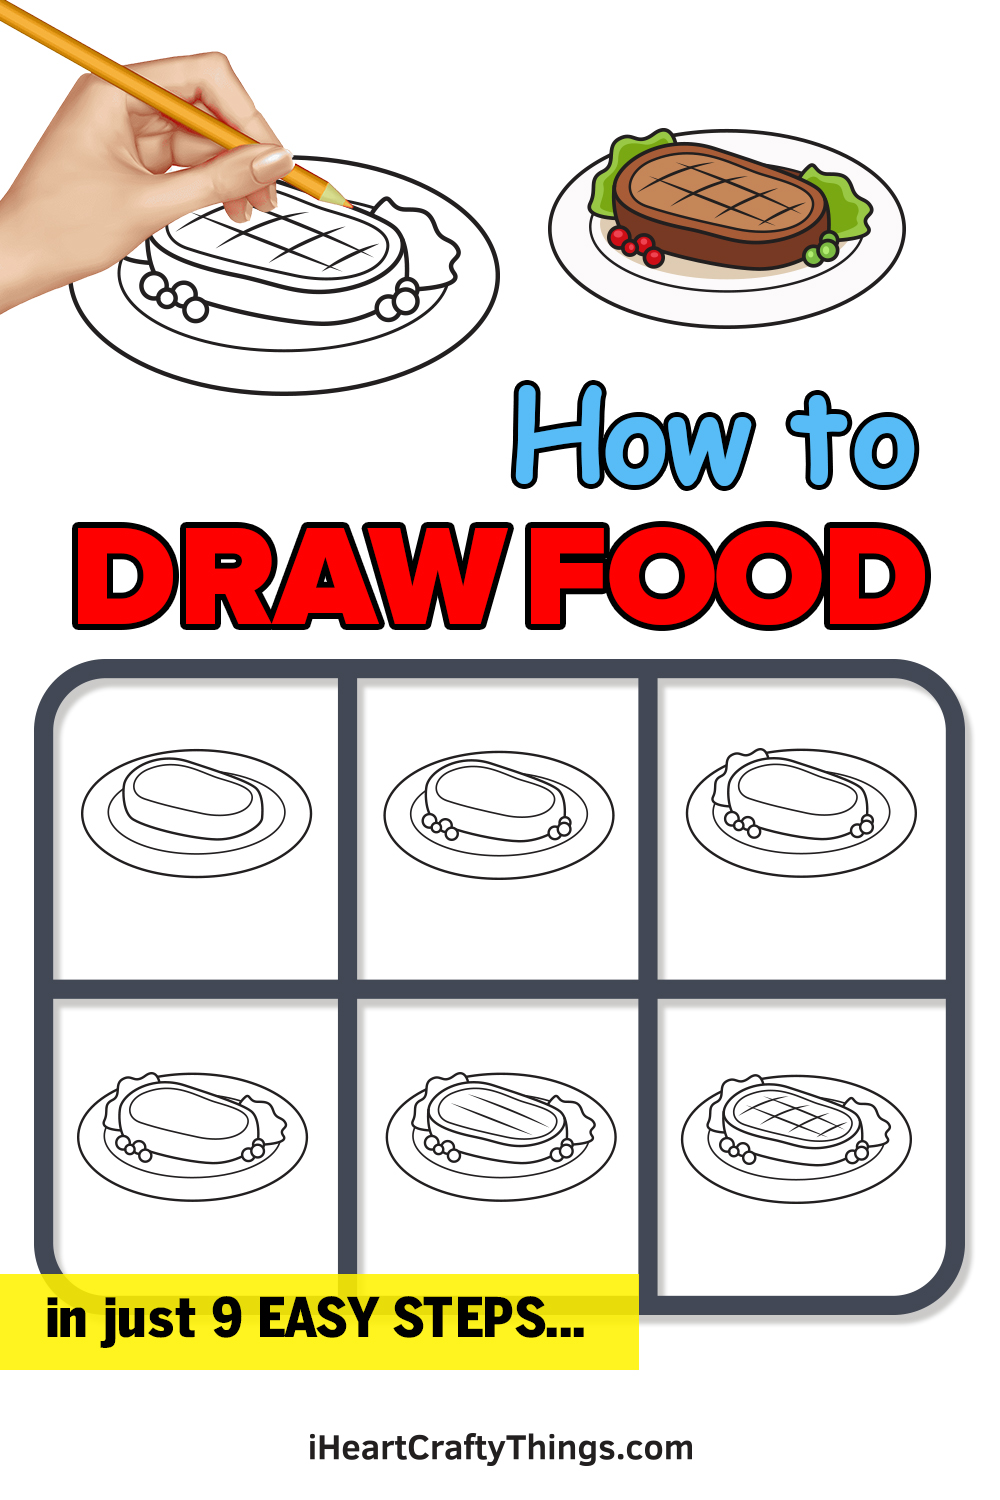 How to Draw Food in 9 Easy Steps